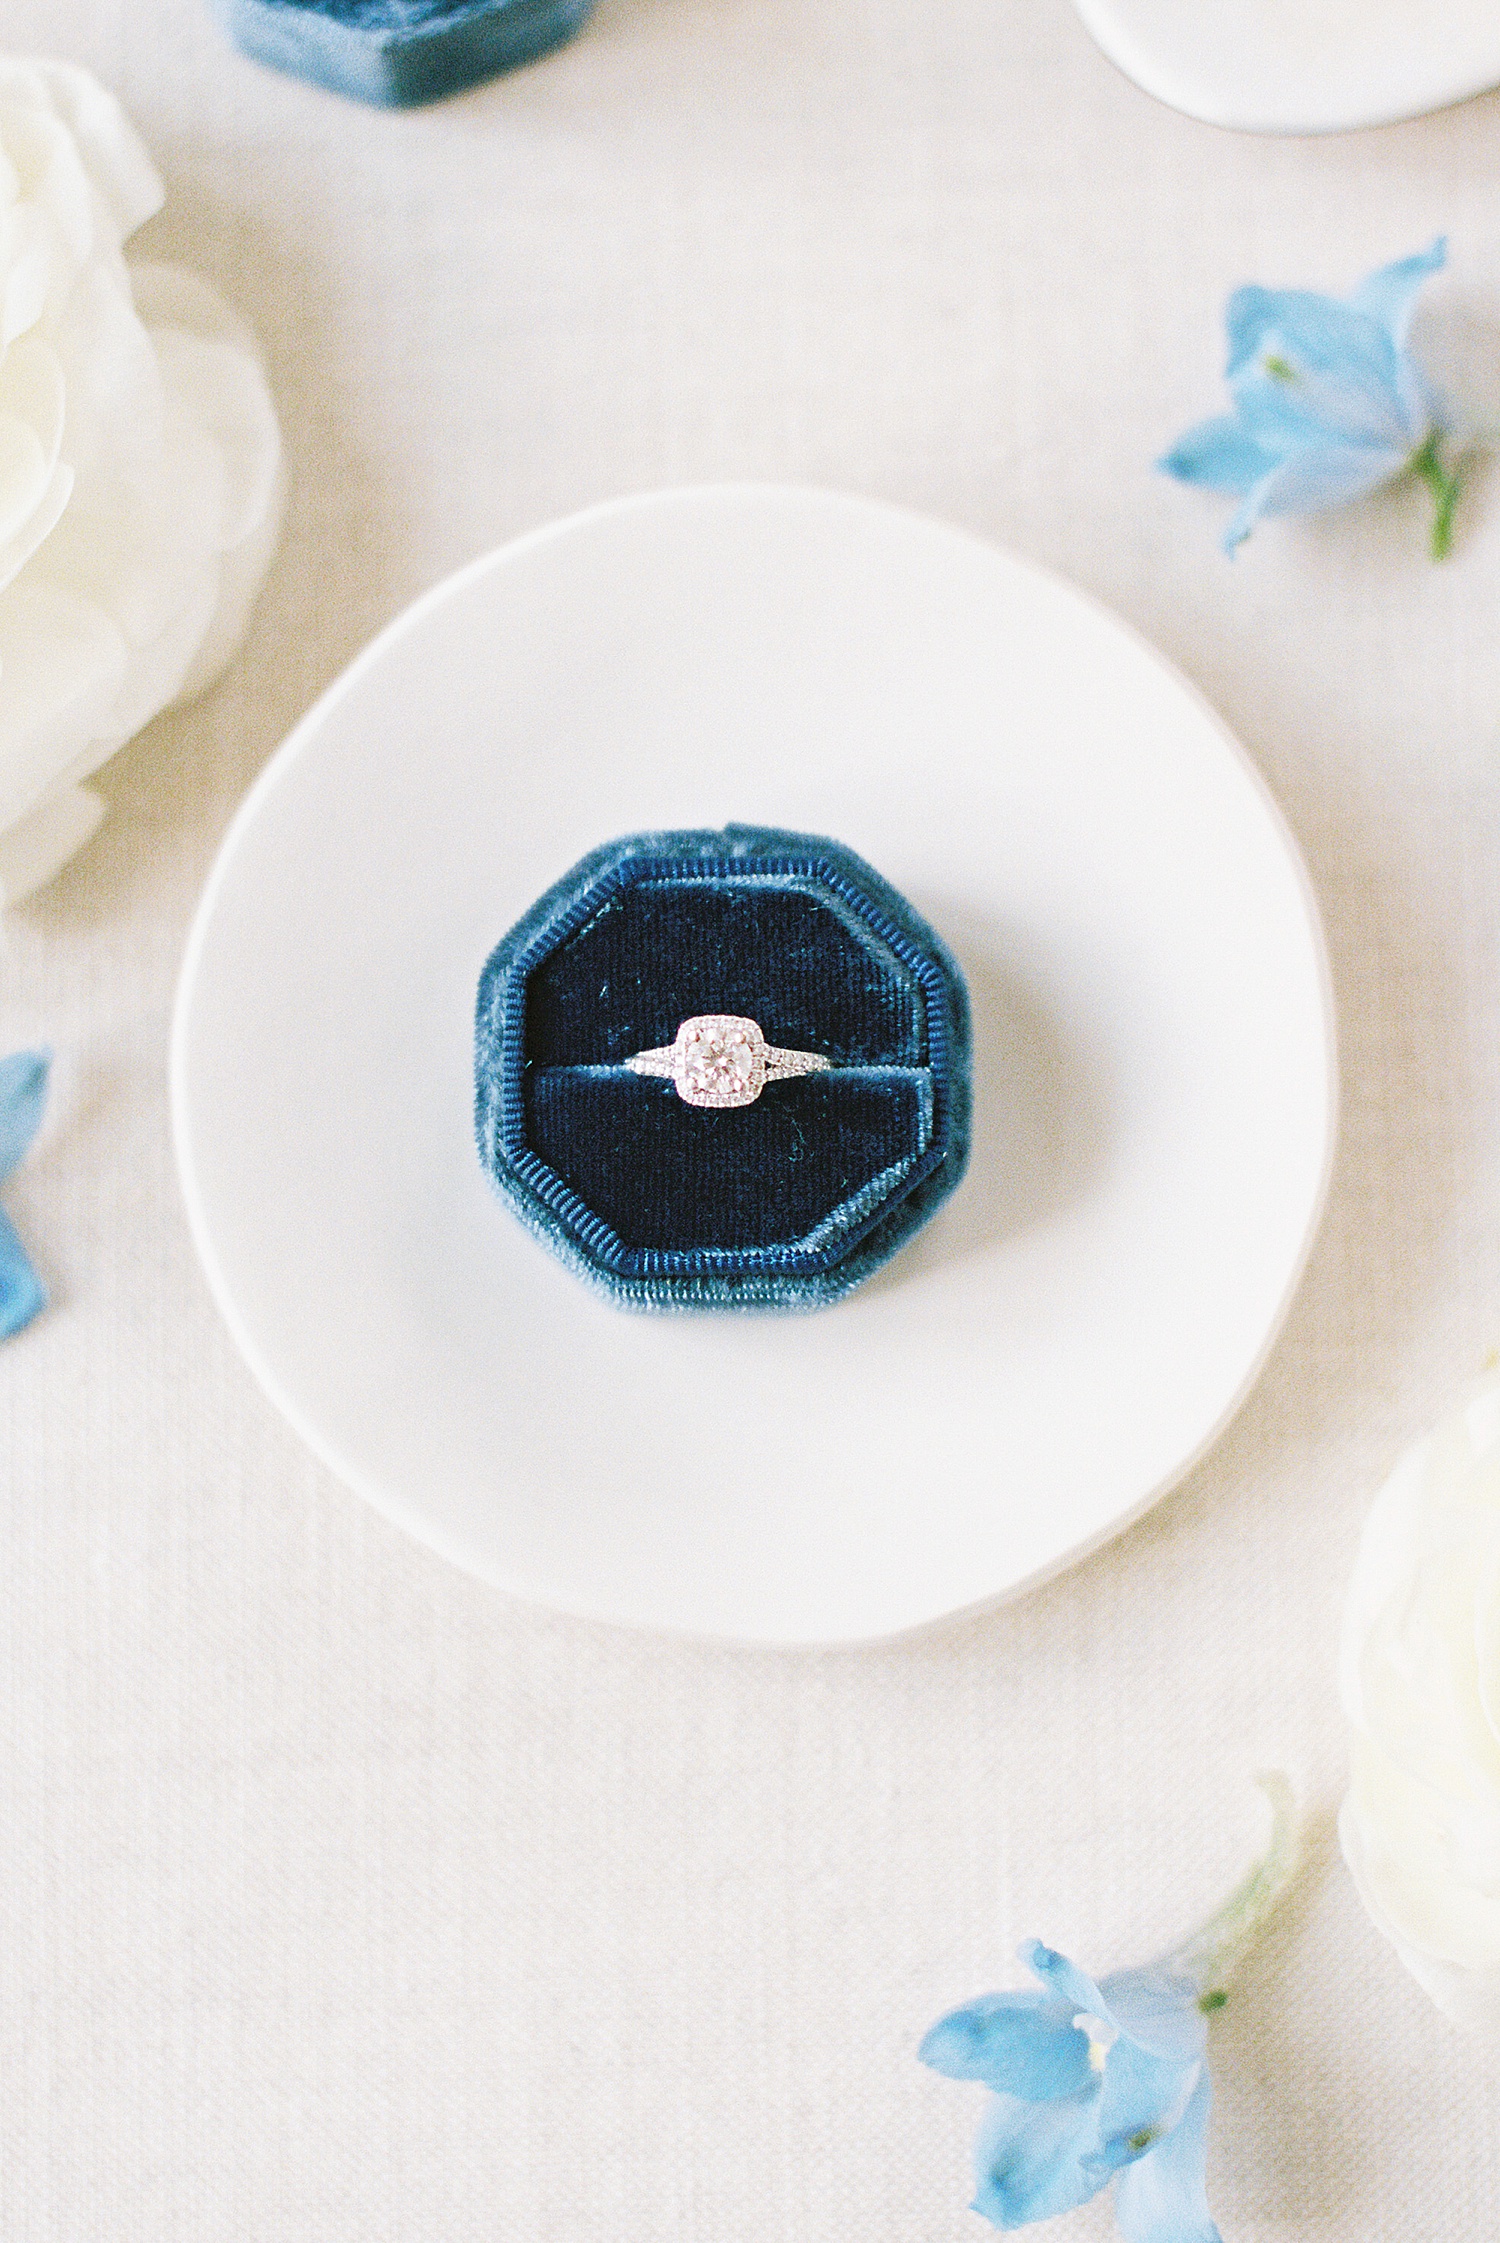 Ring in a blue velvet box for Fourth of July day by New York wedding photographer